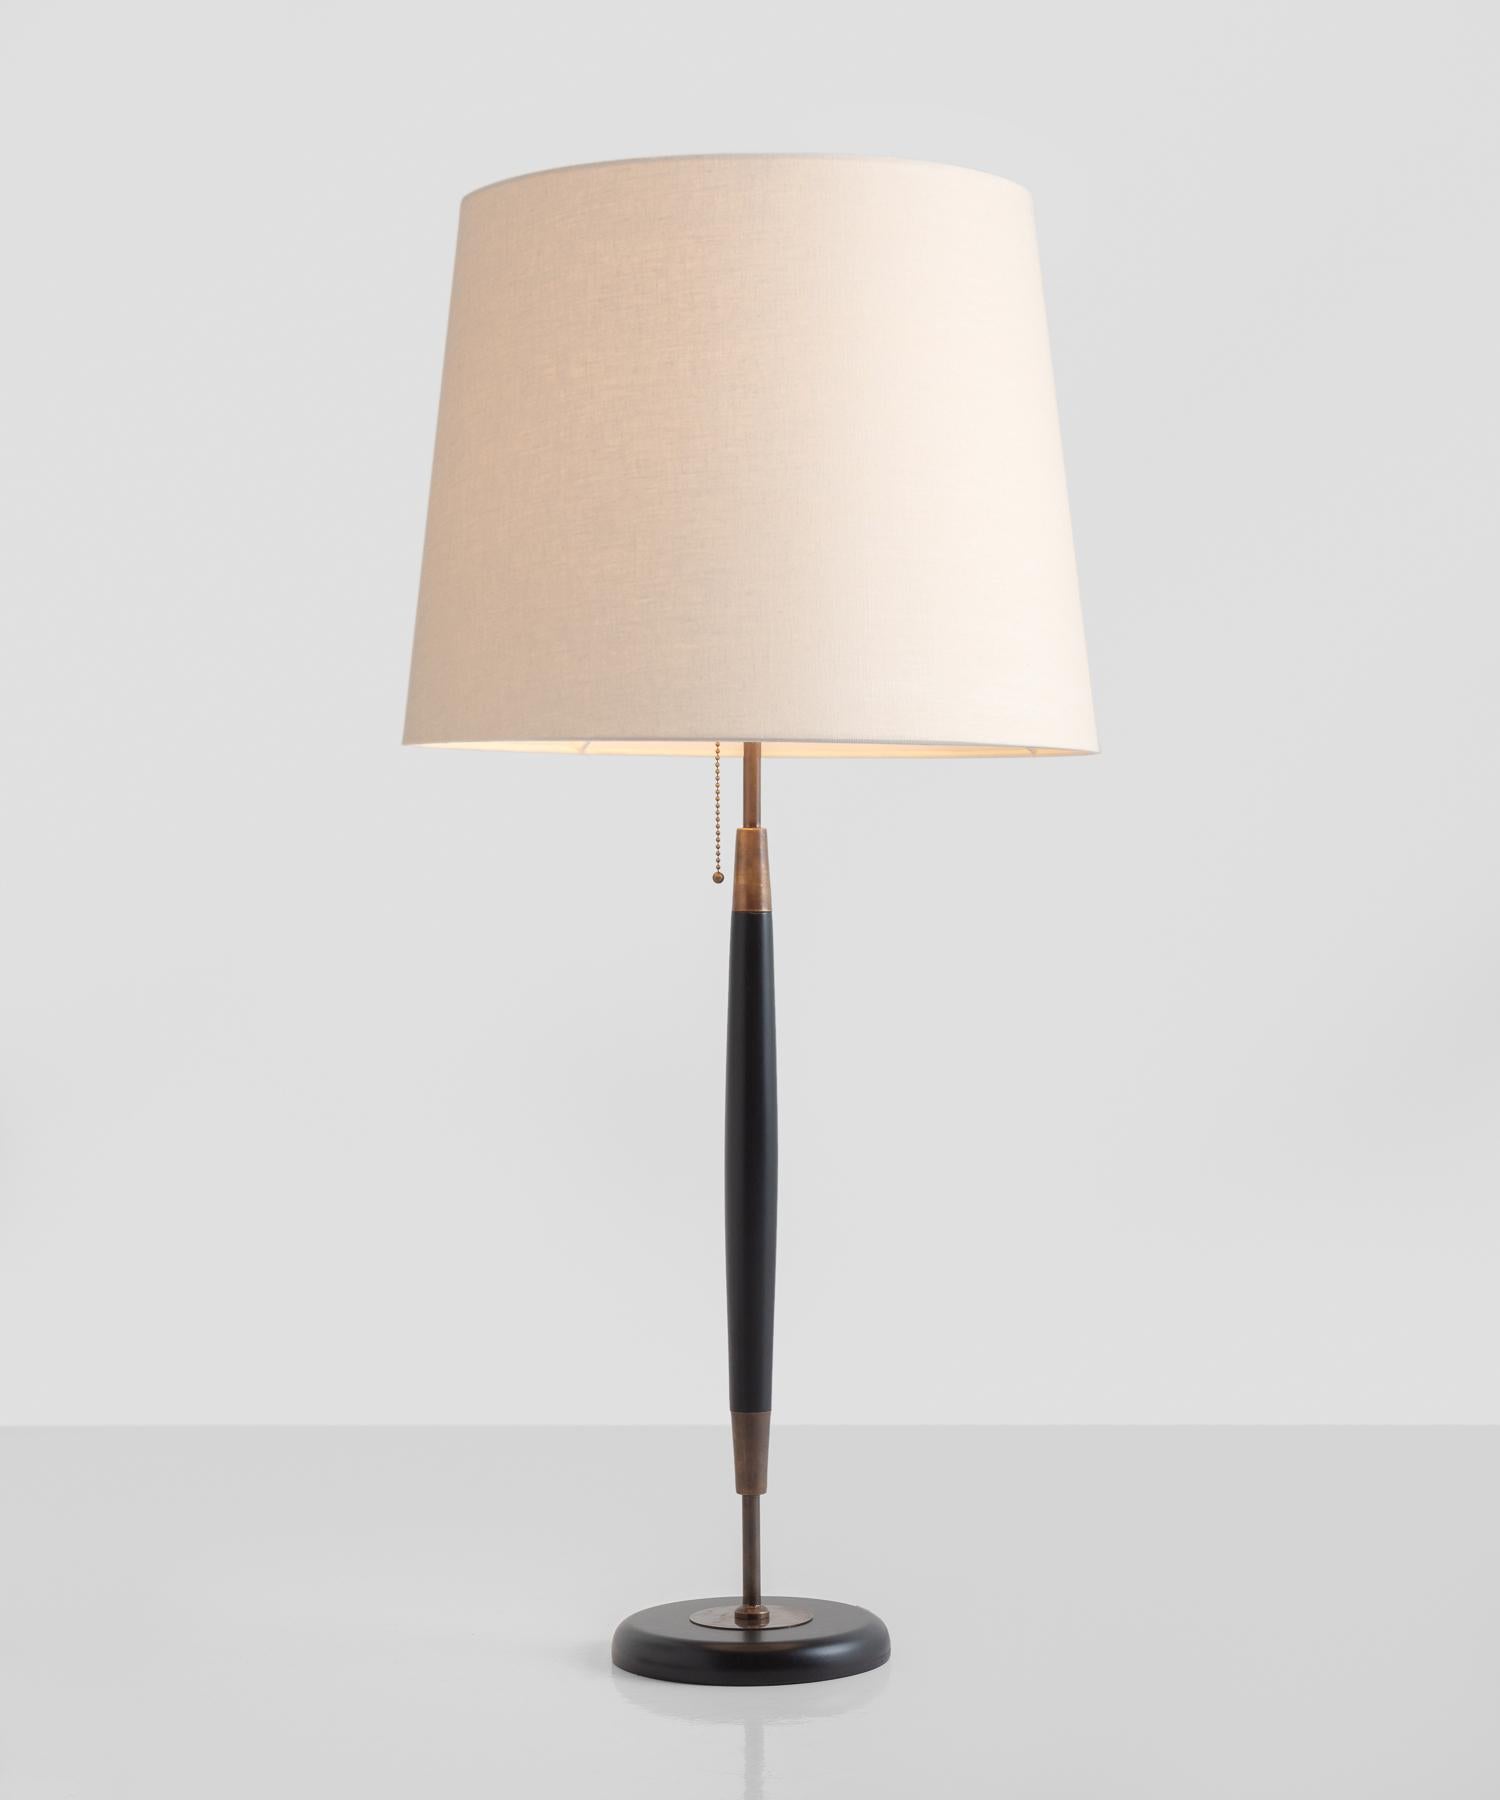 Wood base and stand with brass hardware and linen shade.

Made in Italy

*Please Note: This fixture is made to order in Italy, and comes newly wired (eu wiring). It is not UL Listed. Standard Lead Time is 4-6 Weeks. We do not offer rewiring / UL